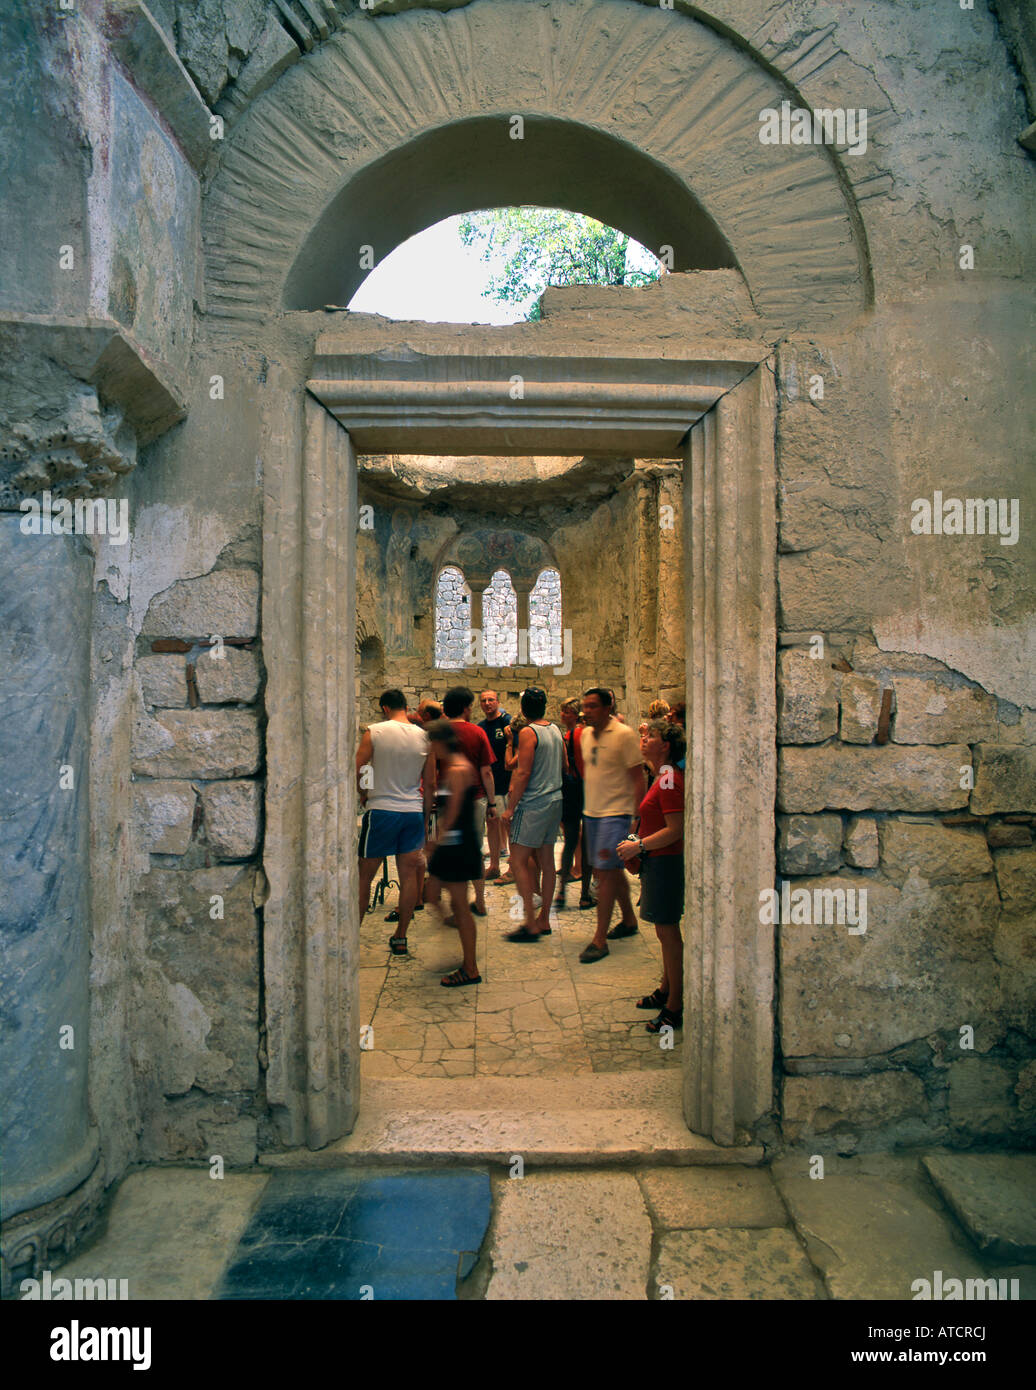 Tourists in the Church of St Nicholas Noel Baba Demre Turkey Stock Photo